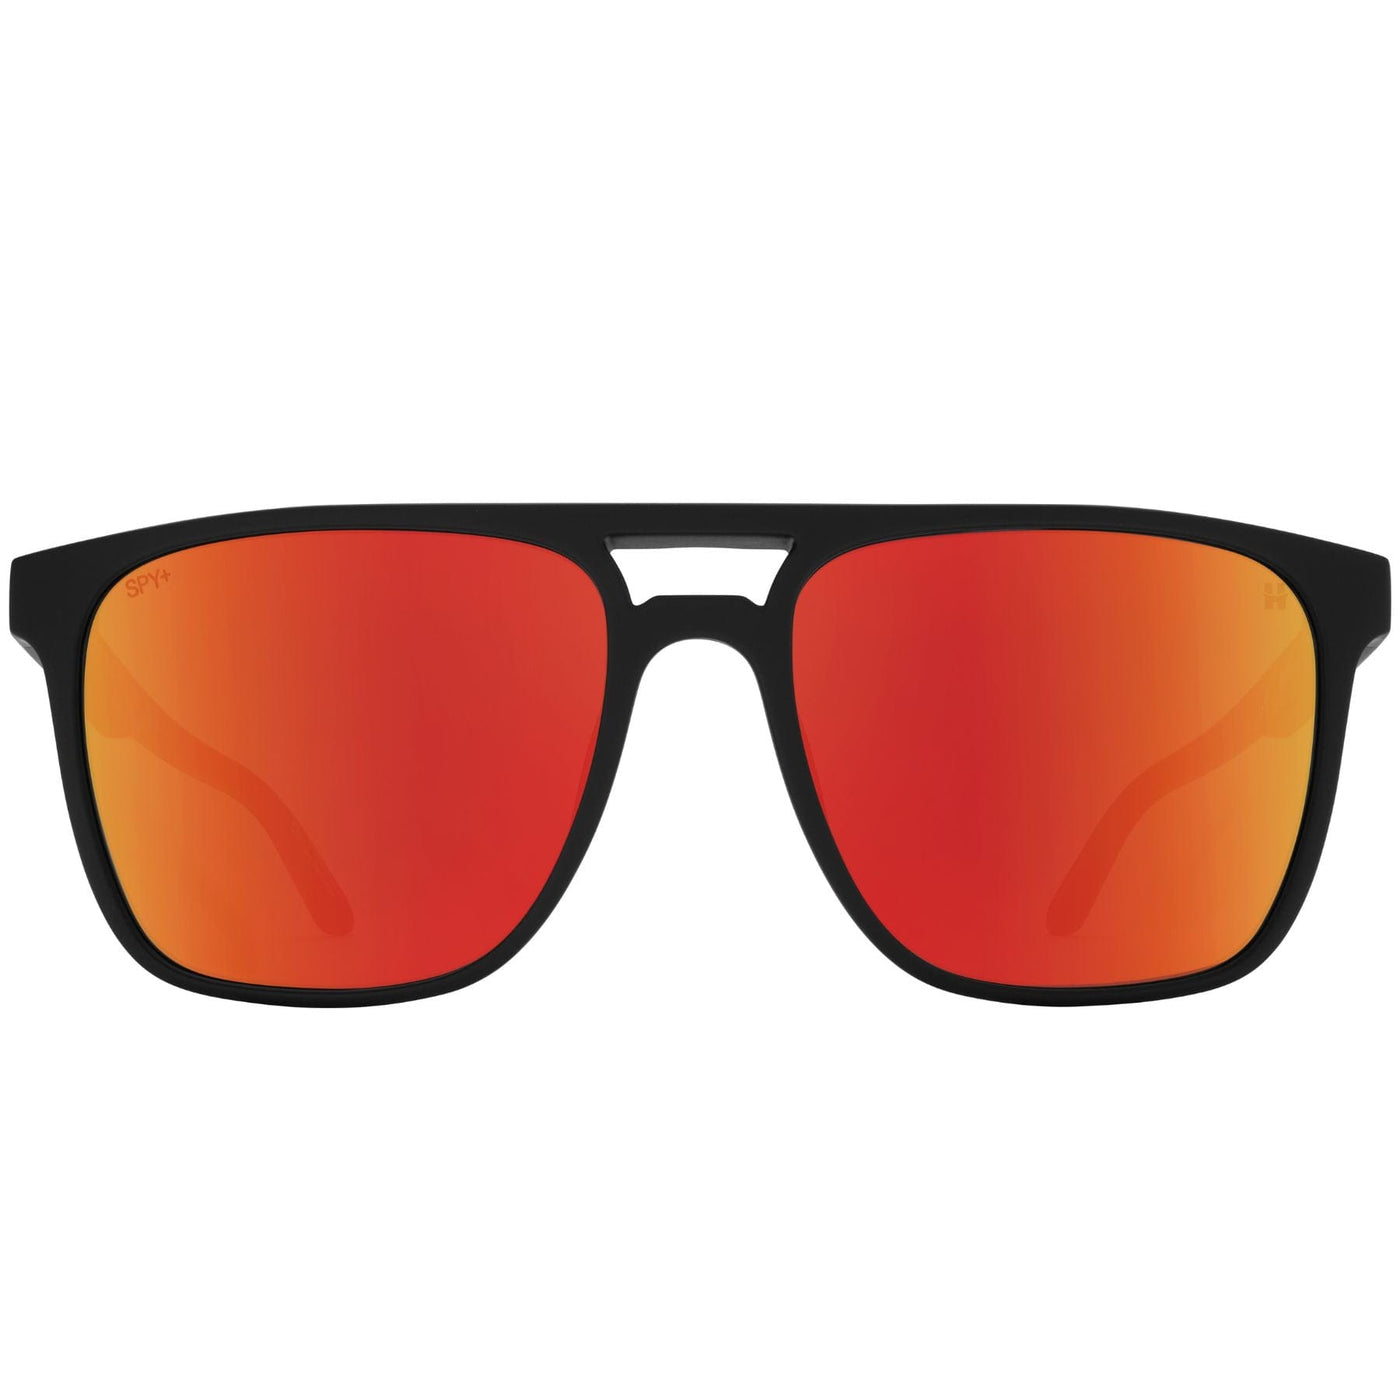 SPY CZAR Sunglasses, Happy Lens - Red 8Lines Shop - Fast Shipping